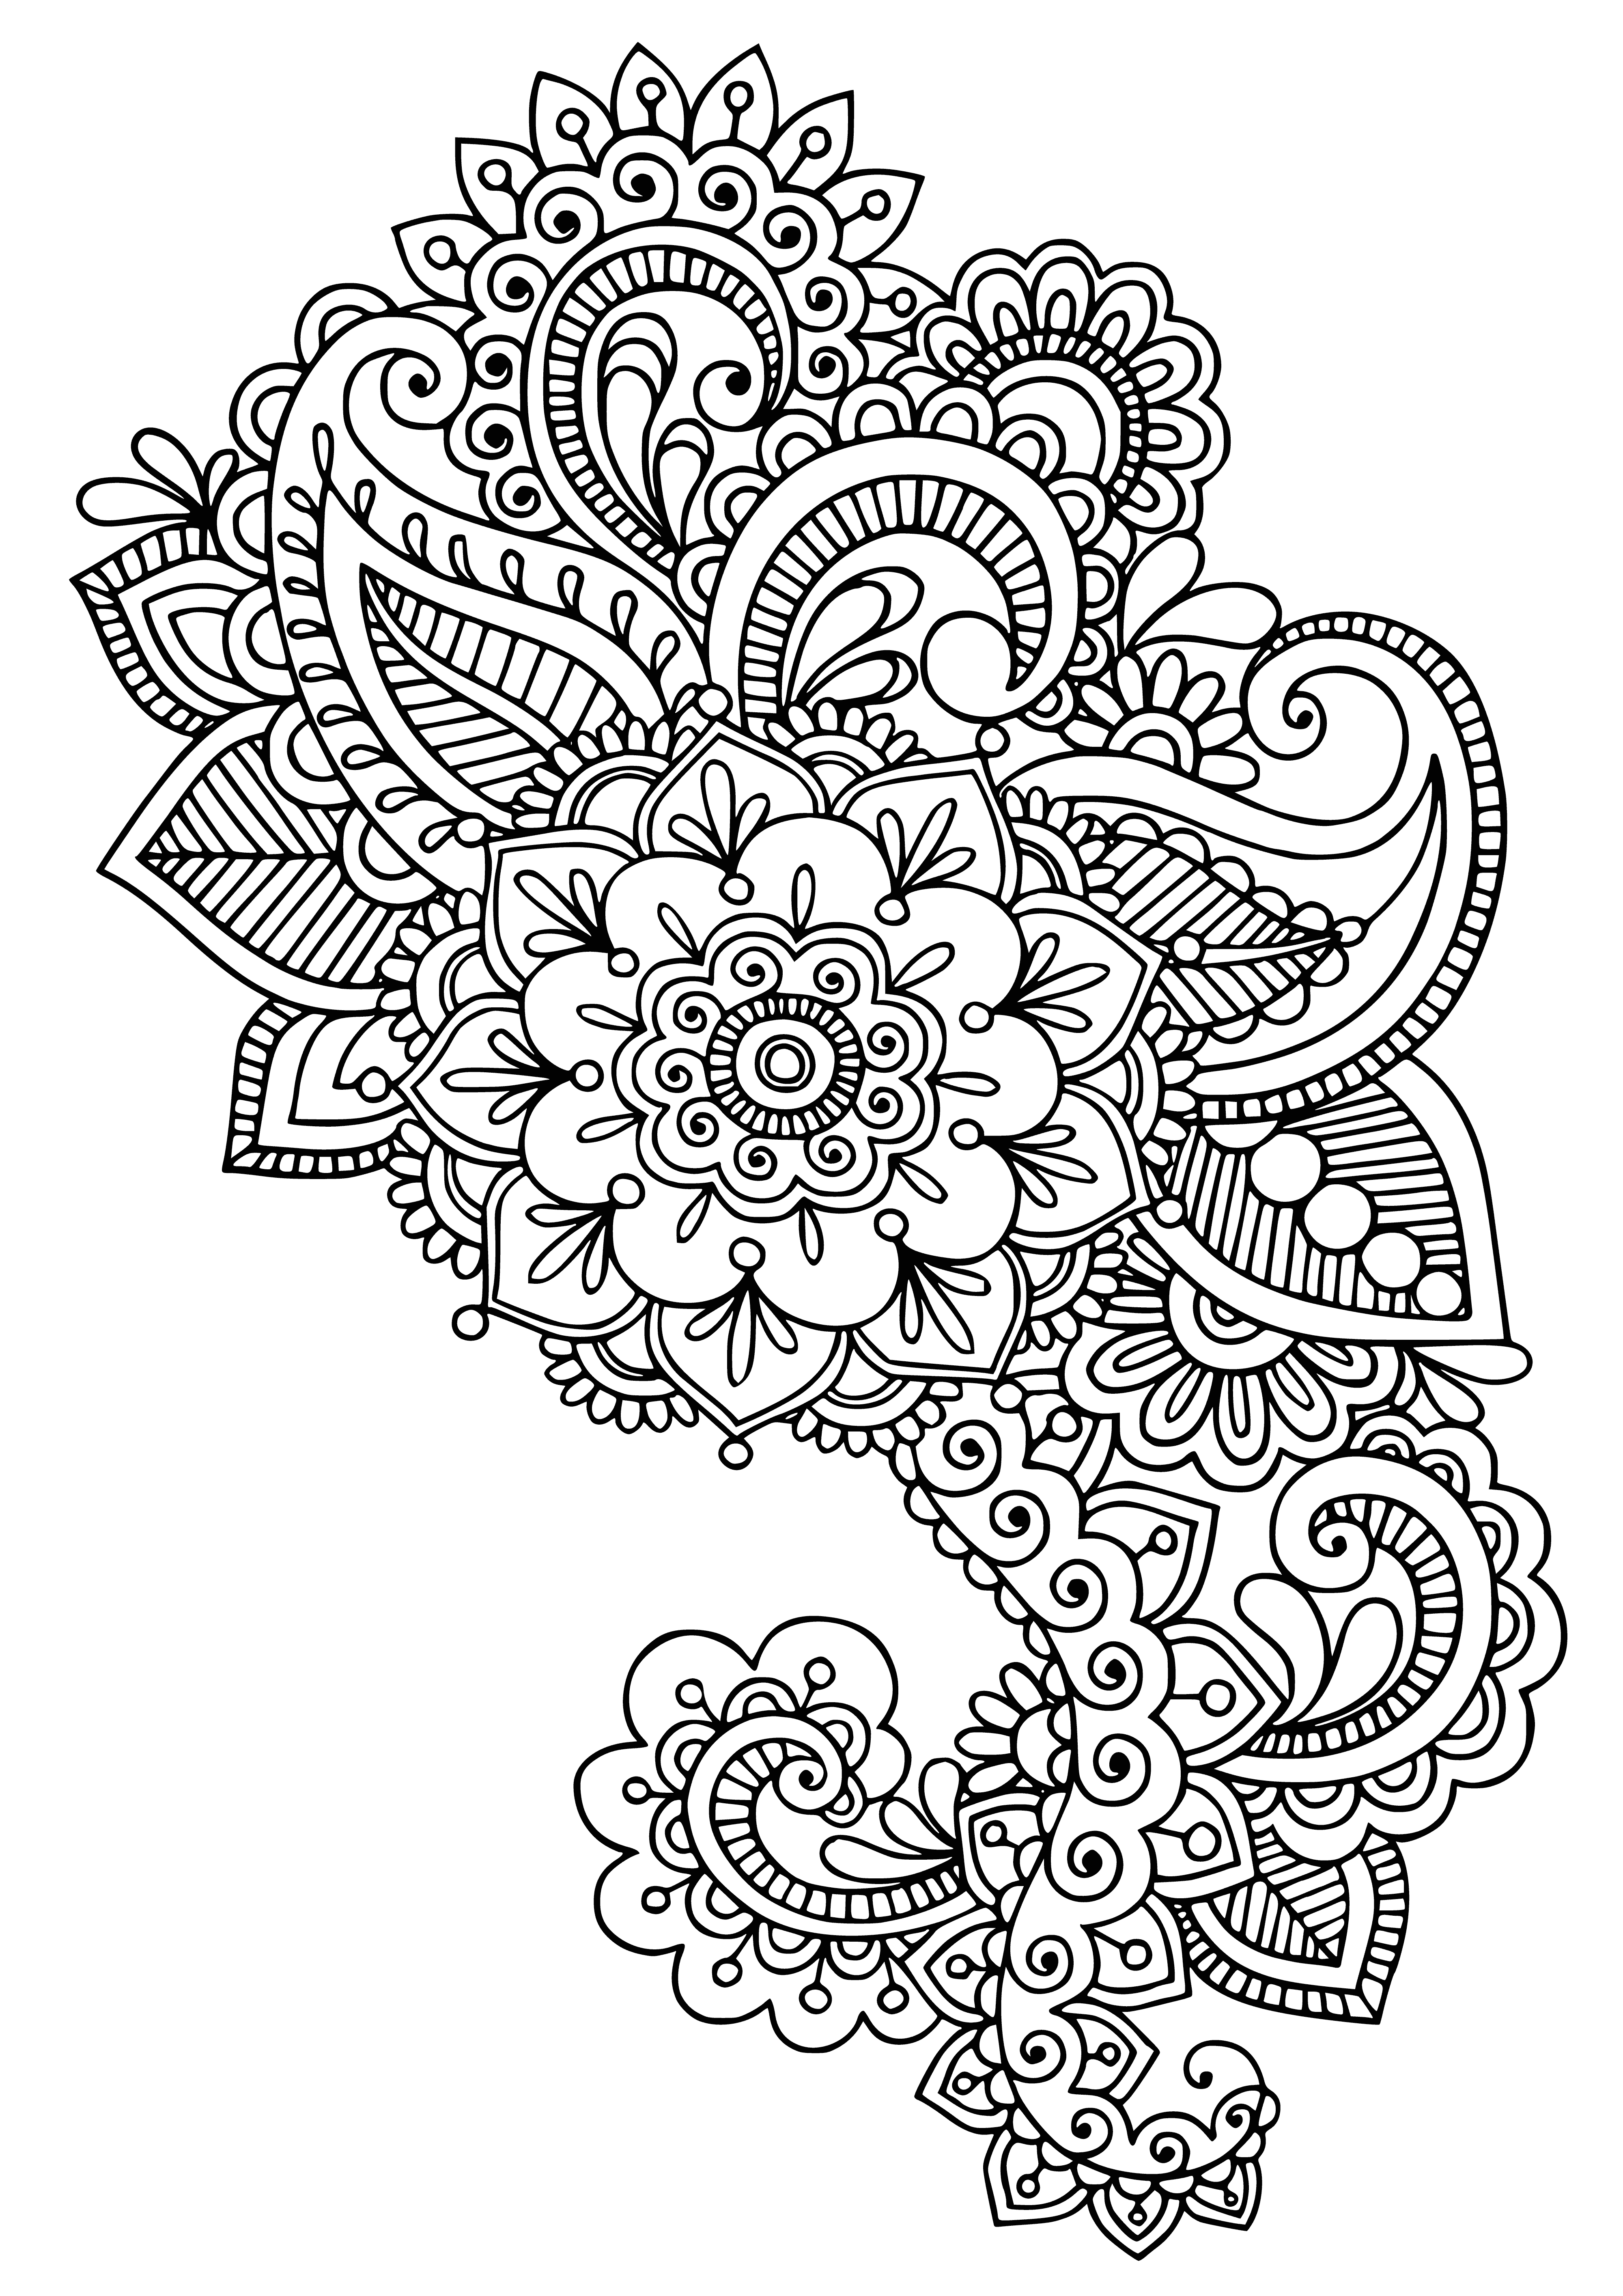 Flower pattern coloring page